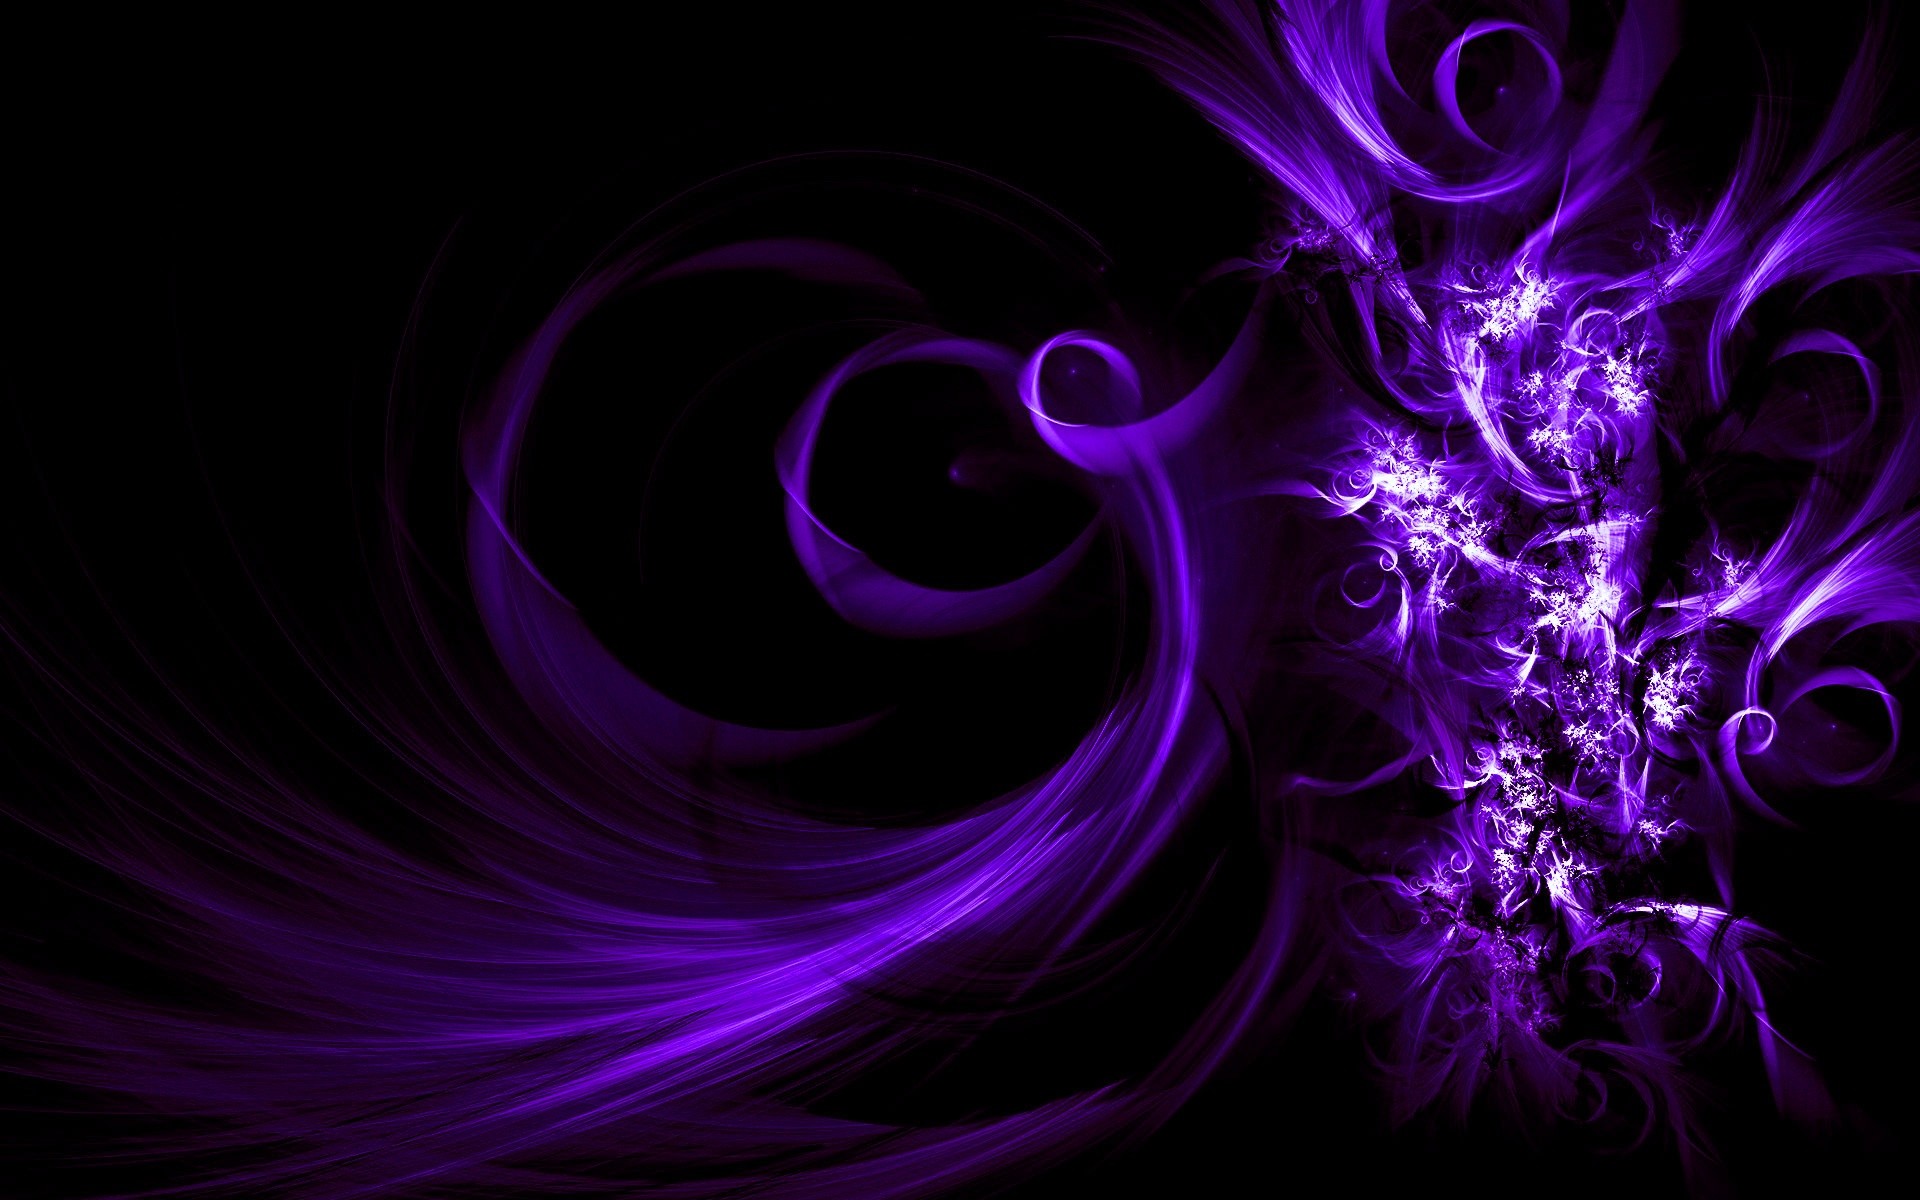 1920x1200 Black And Purple Abstract Cool Backgrounds Hd Wallpaper Site. house of  plan. showroom interior ...